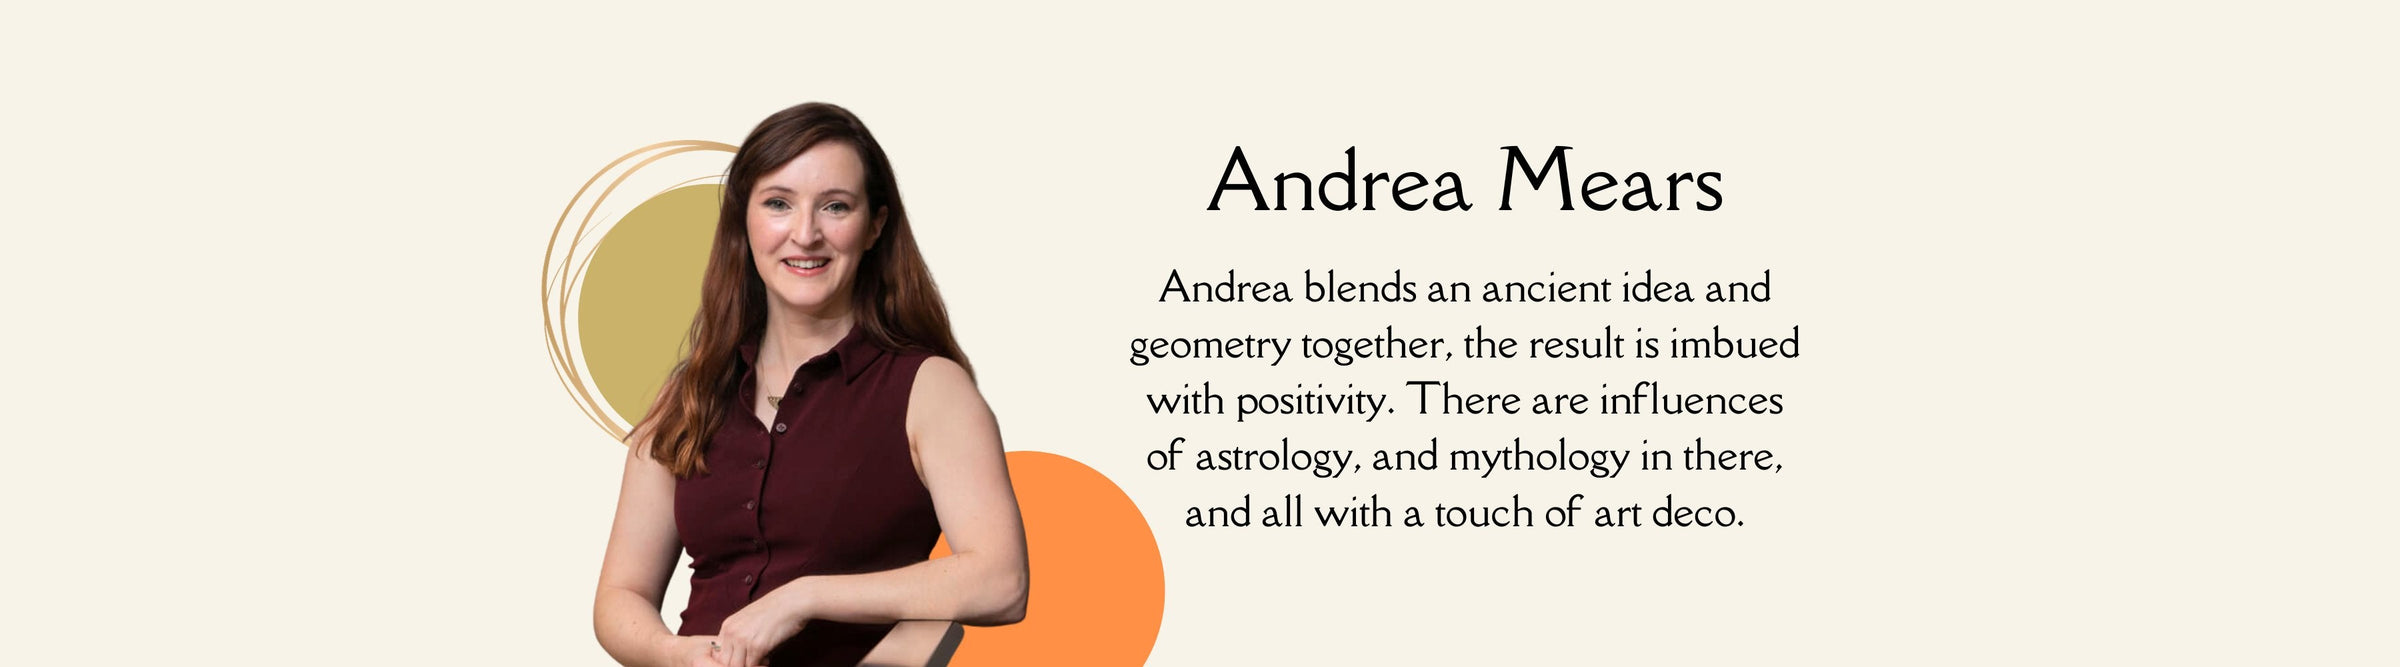 Andrea blends an ancient idea and geometry together, the result is imbued with positivity. There are influences of astrology, and mythology in there, and all with a touch of art deco.